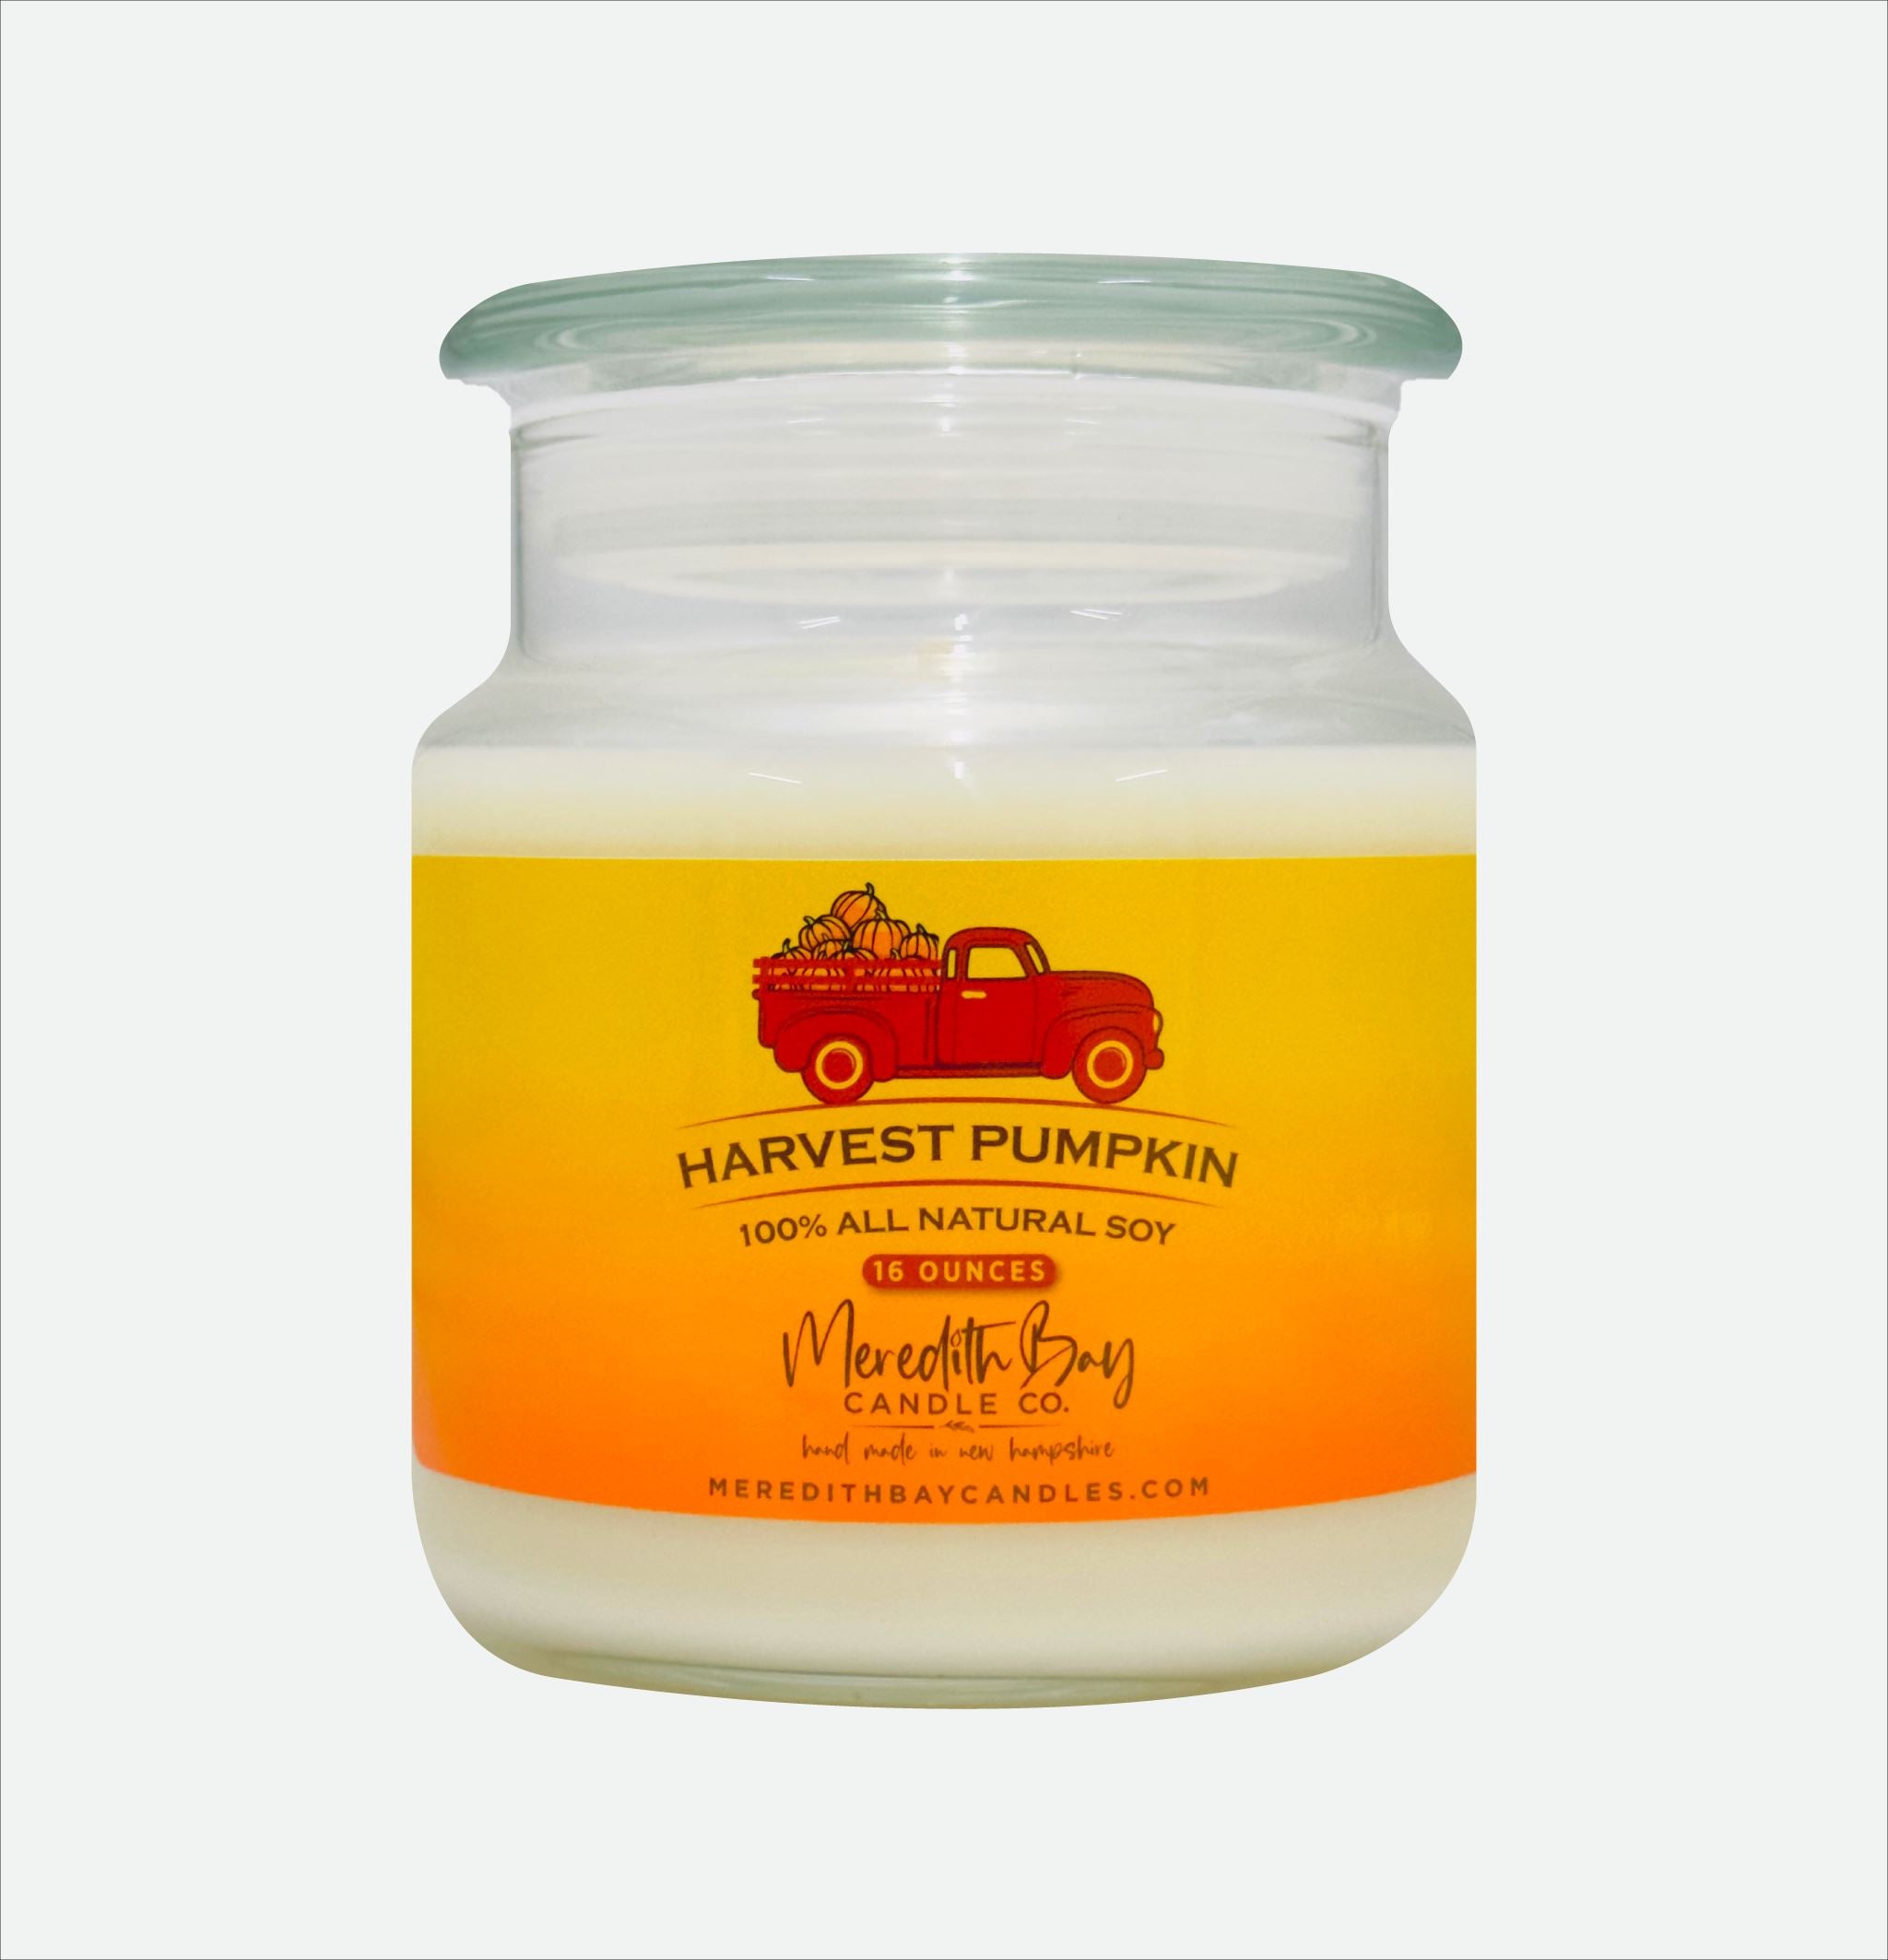 Harvest Pumpkin Soy Candle Meredith Bay Candle Co 16 Oz 